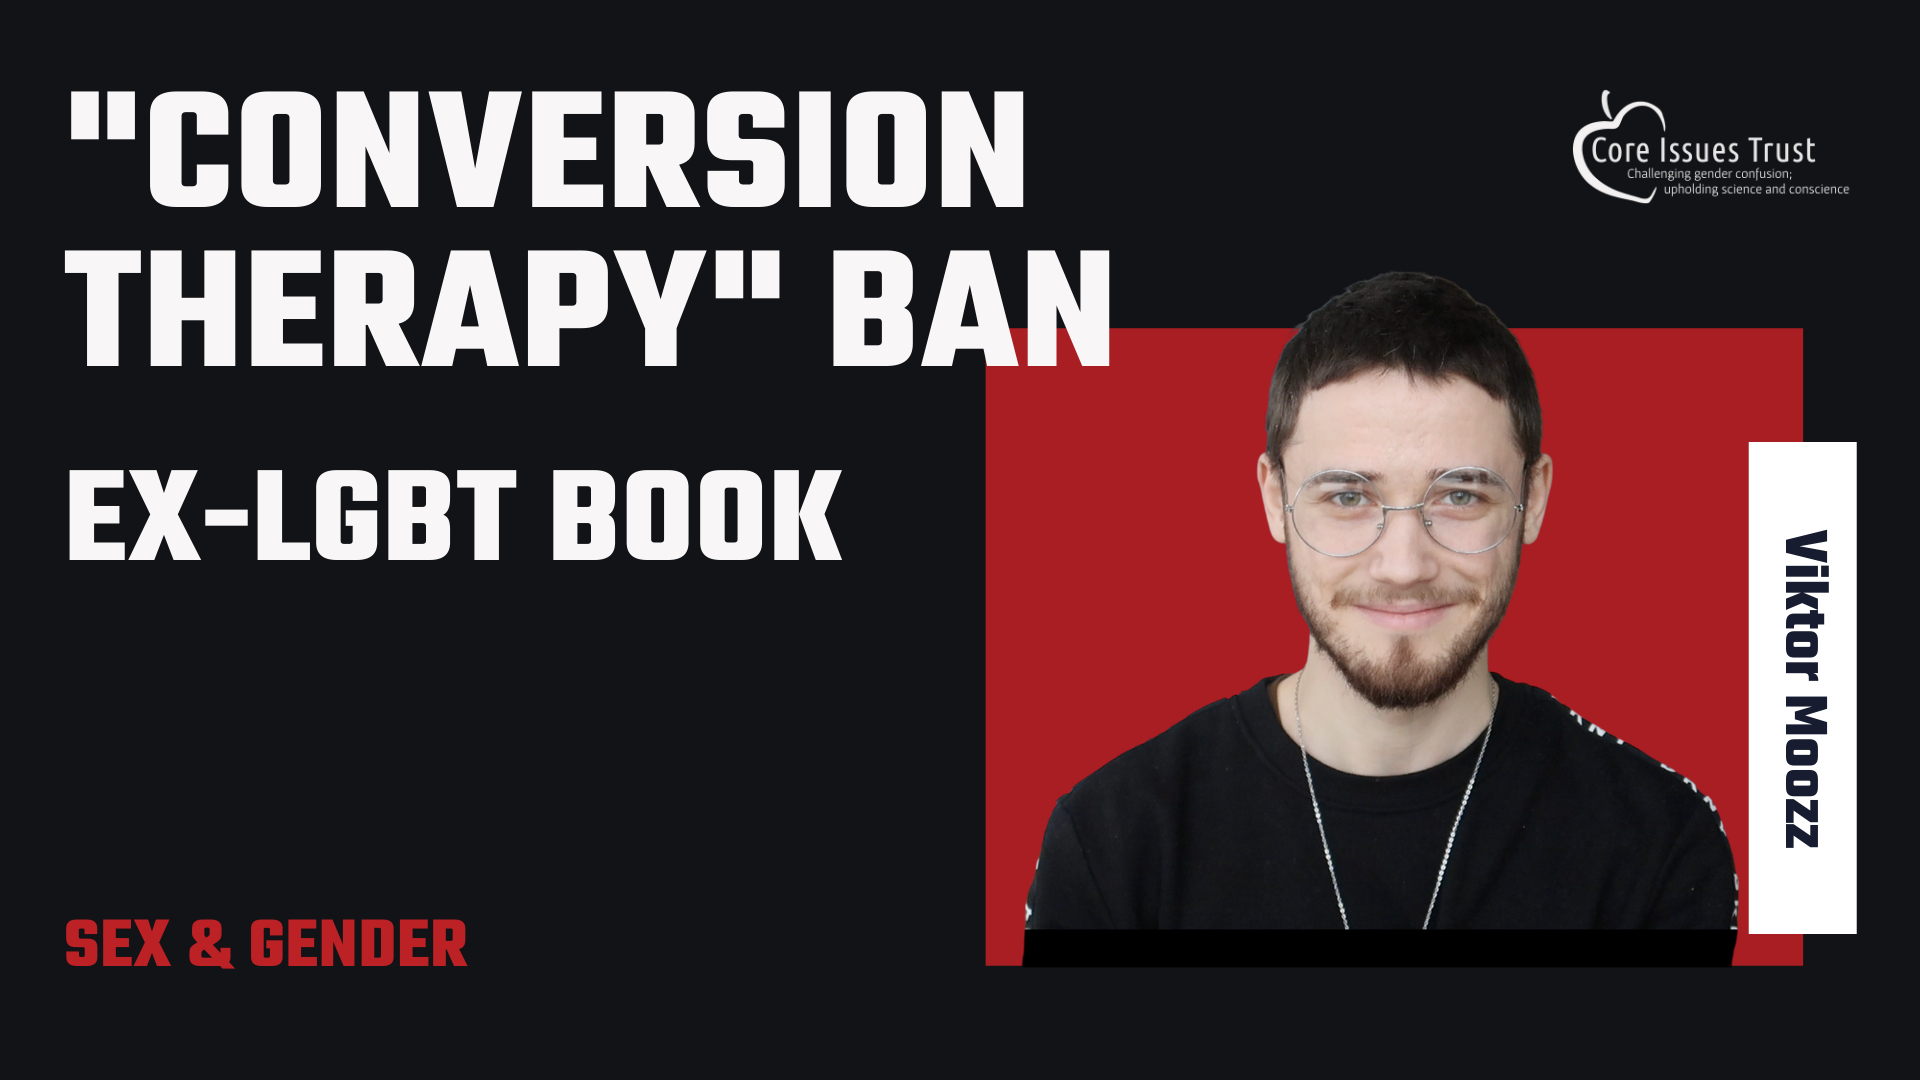 Let's talk about Sex & Gender #1 - what is Conversion Therapy Ban